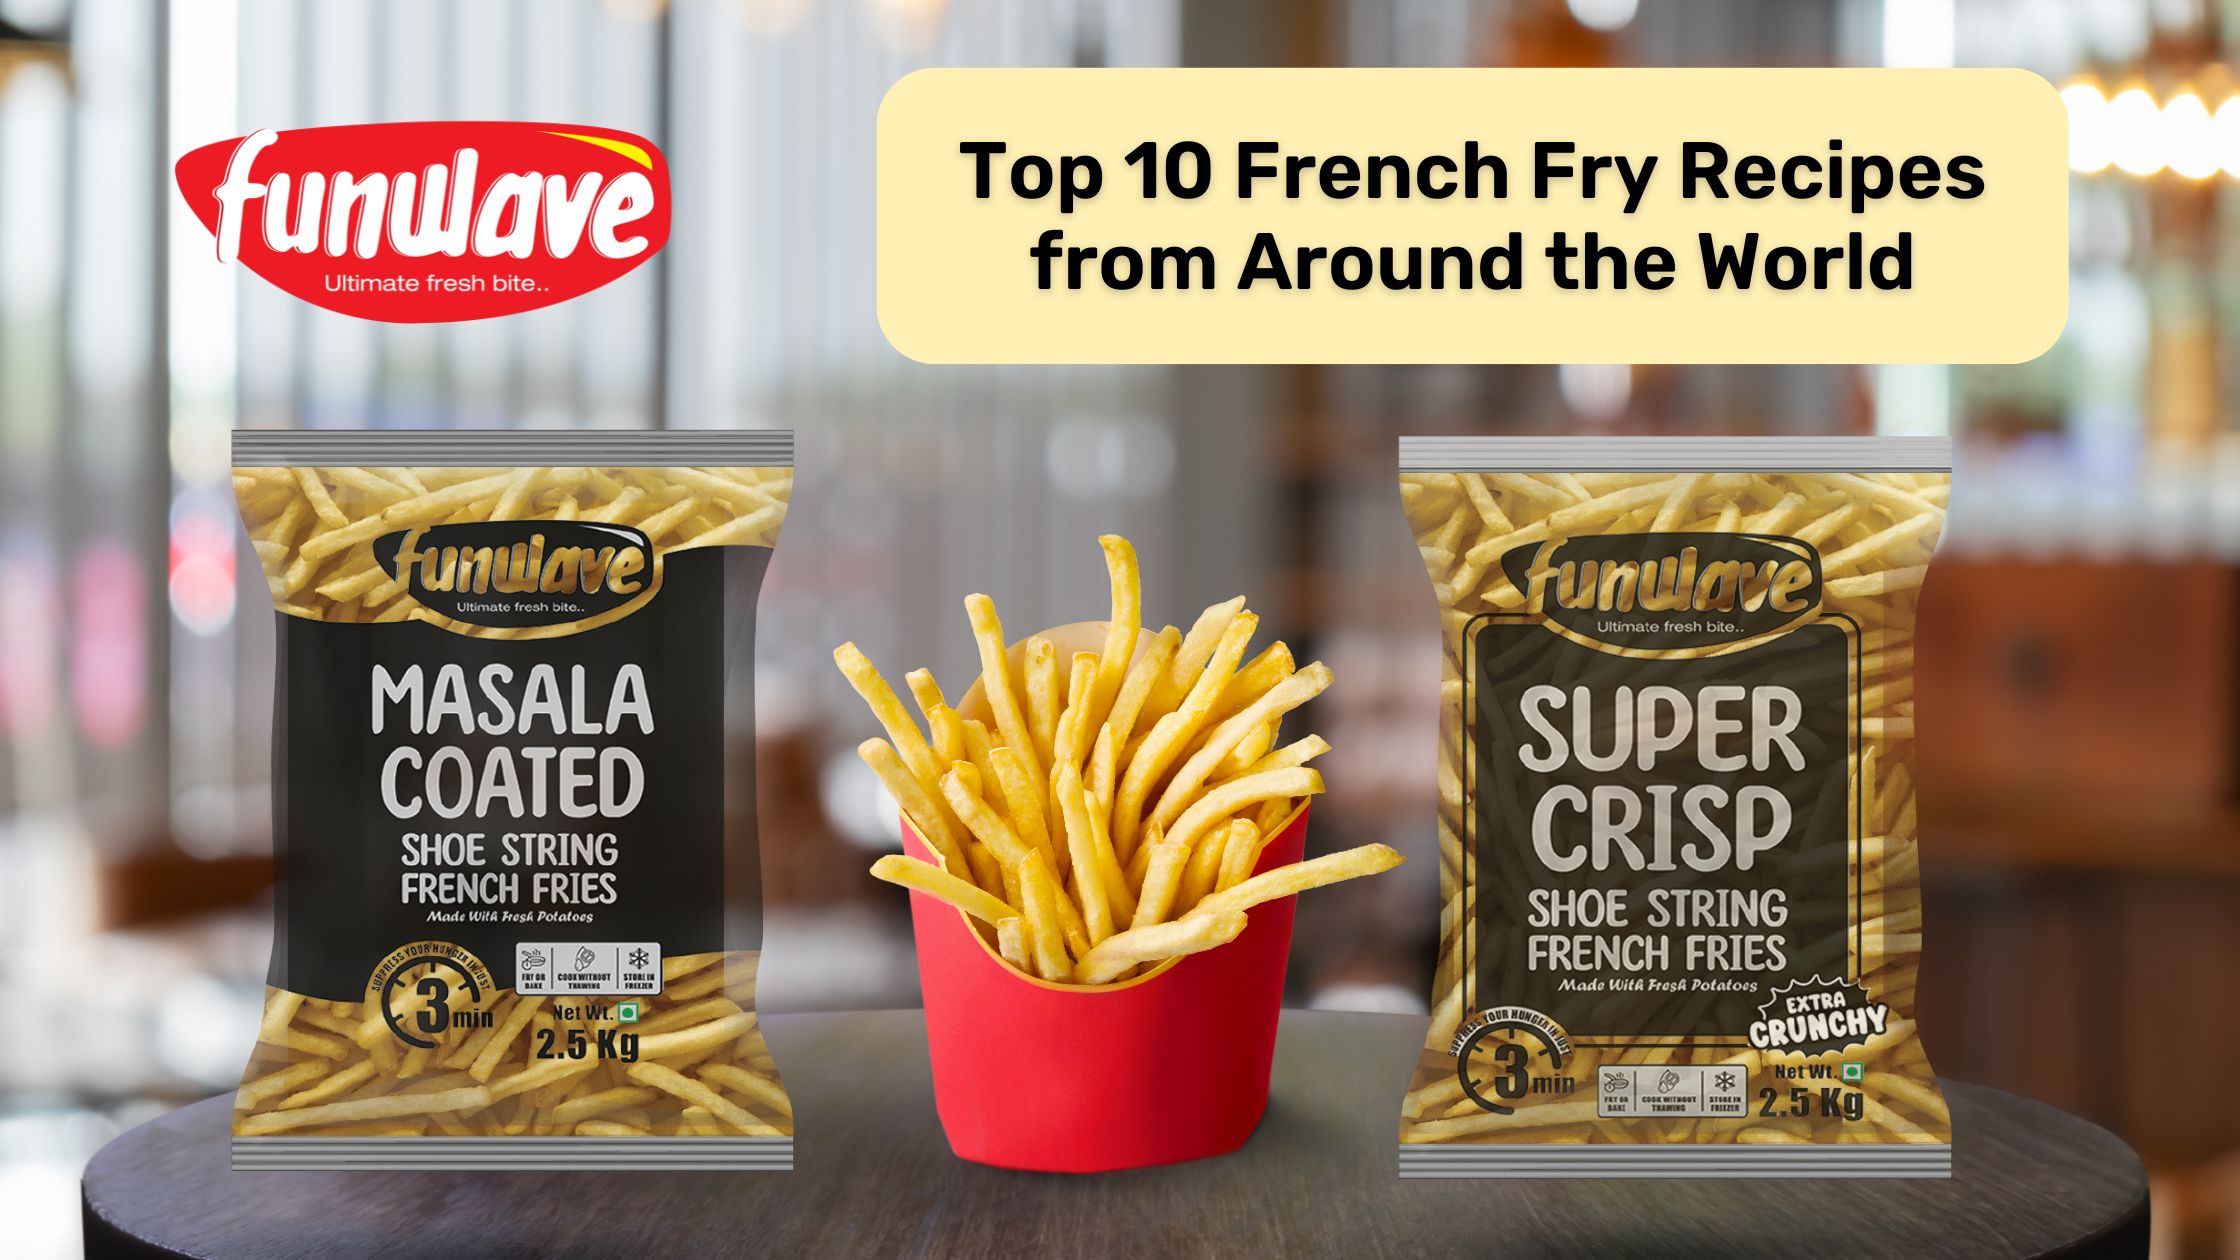 Top 10 French Fry Recipes from Around the World